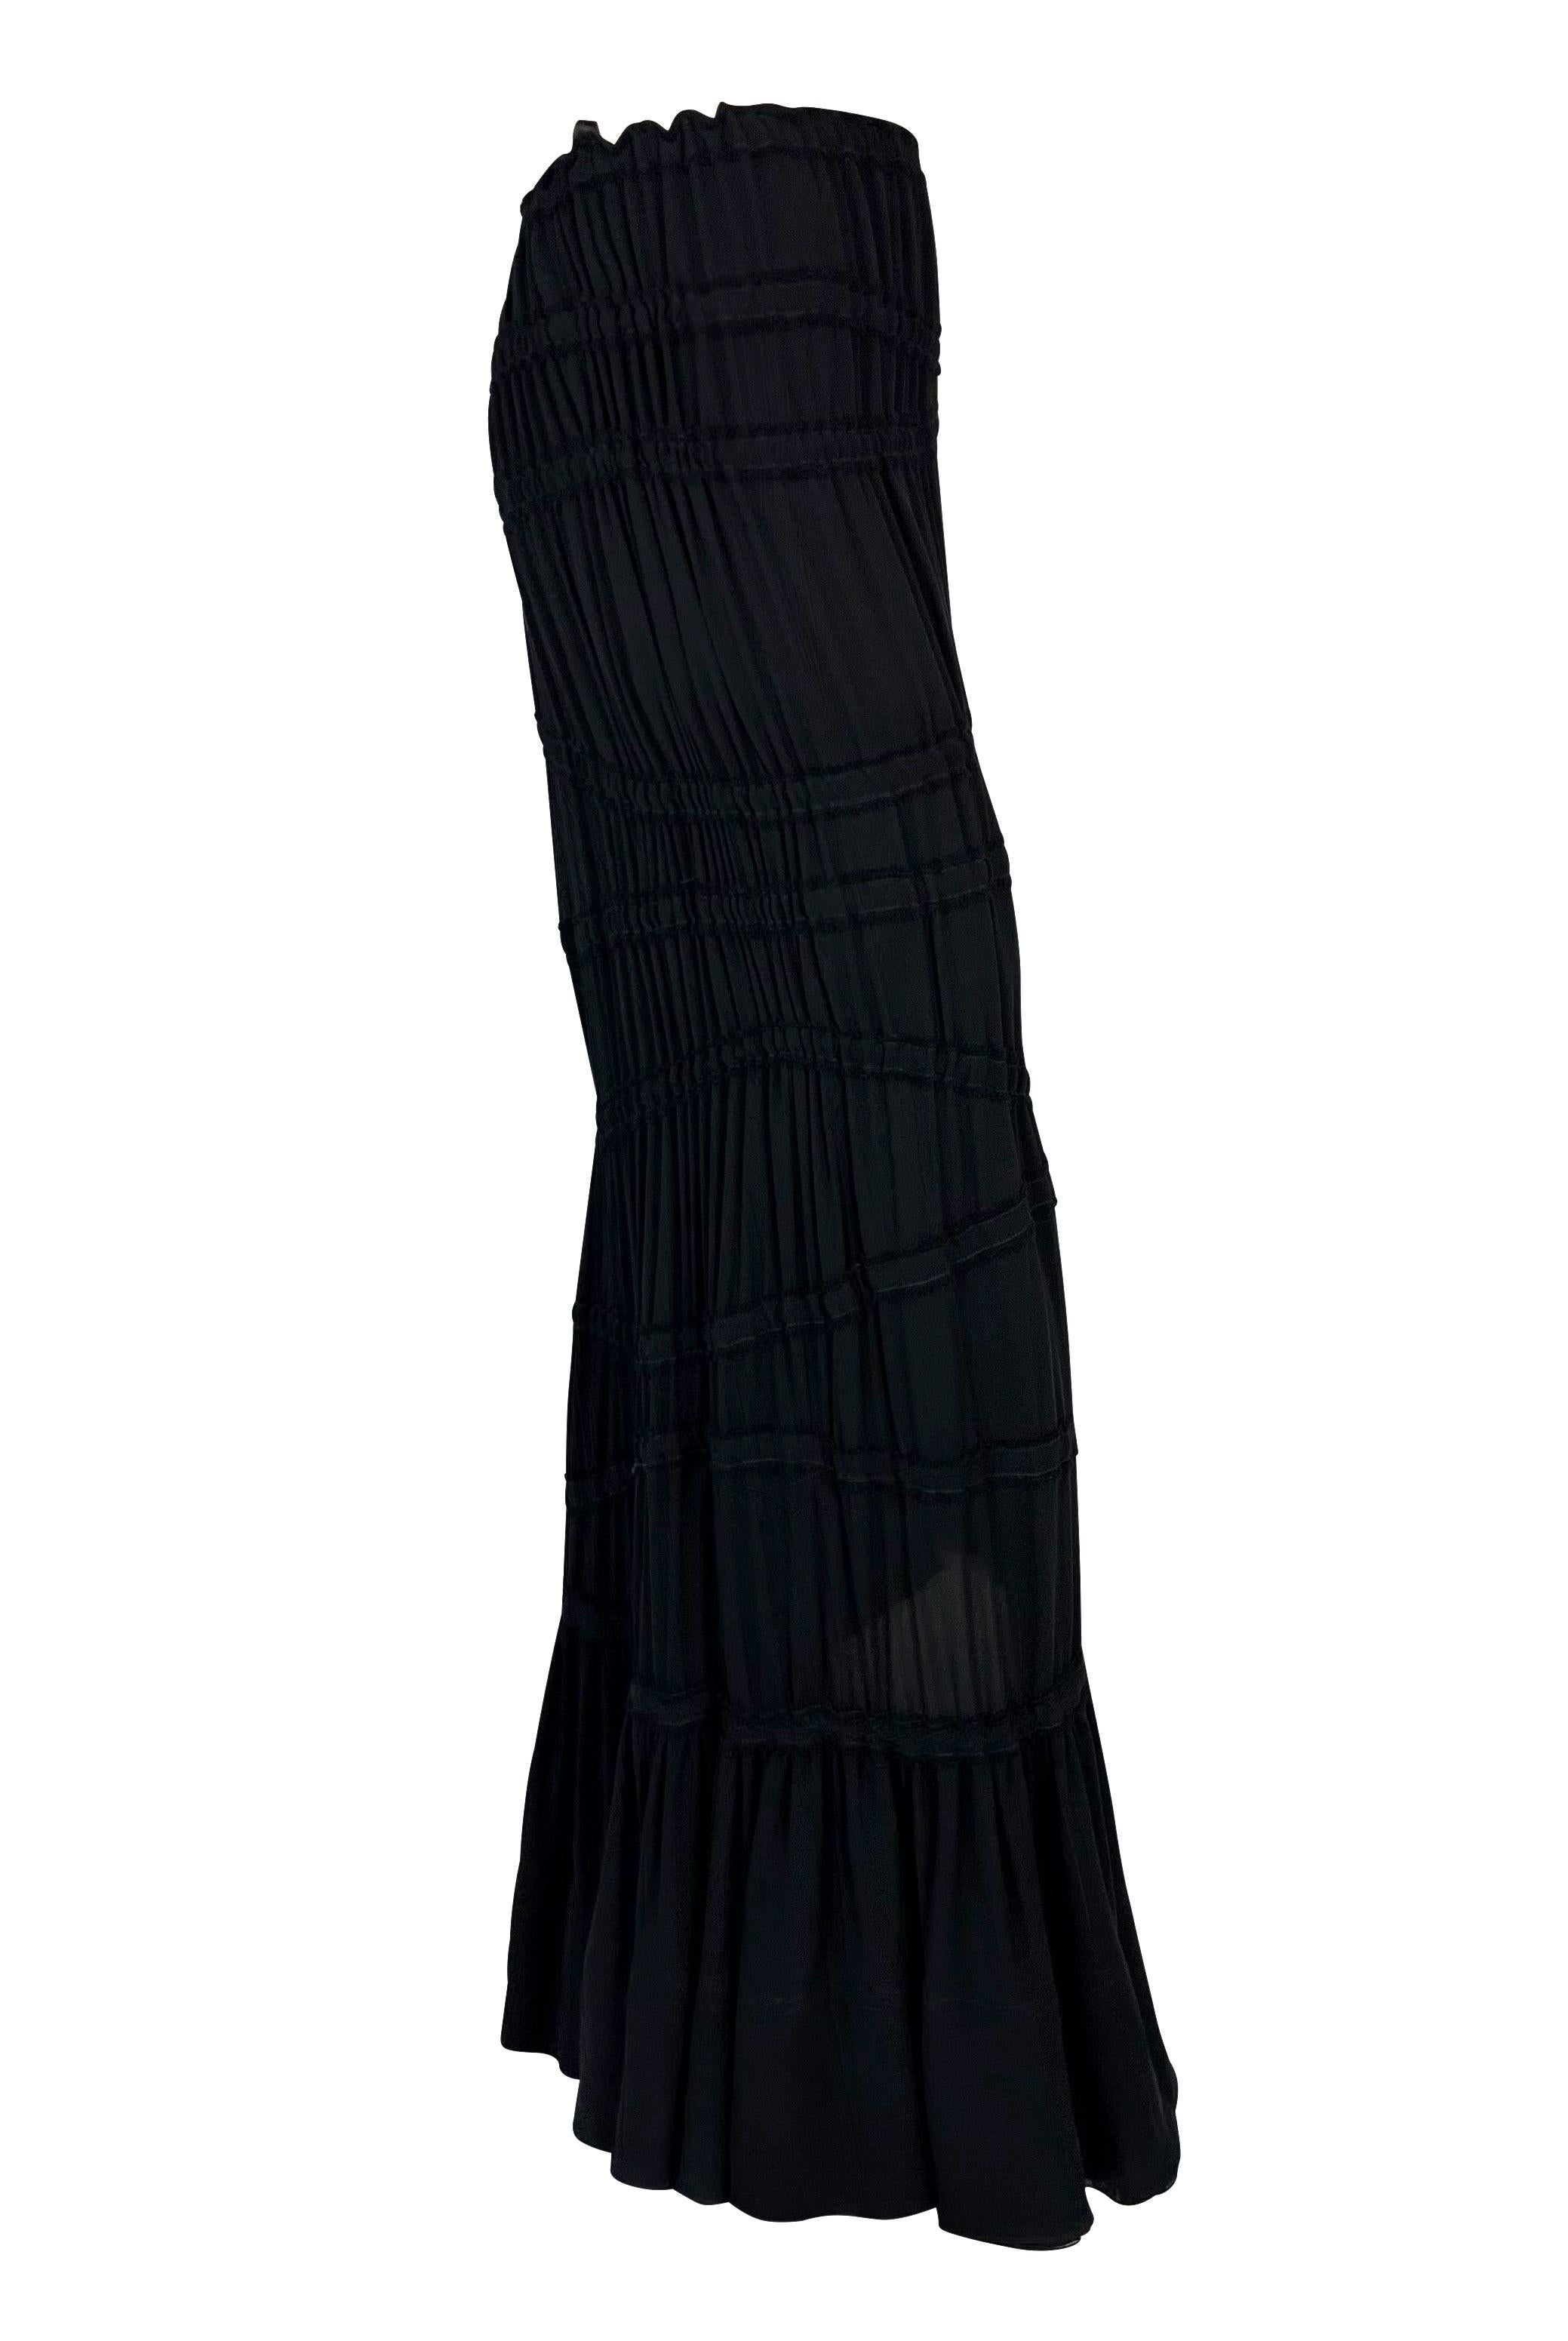 F/W 2001 Yves Saint Laurent by Tom Ford Runway Ruched Stretch Flare Maxi Skirt For Sale 2